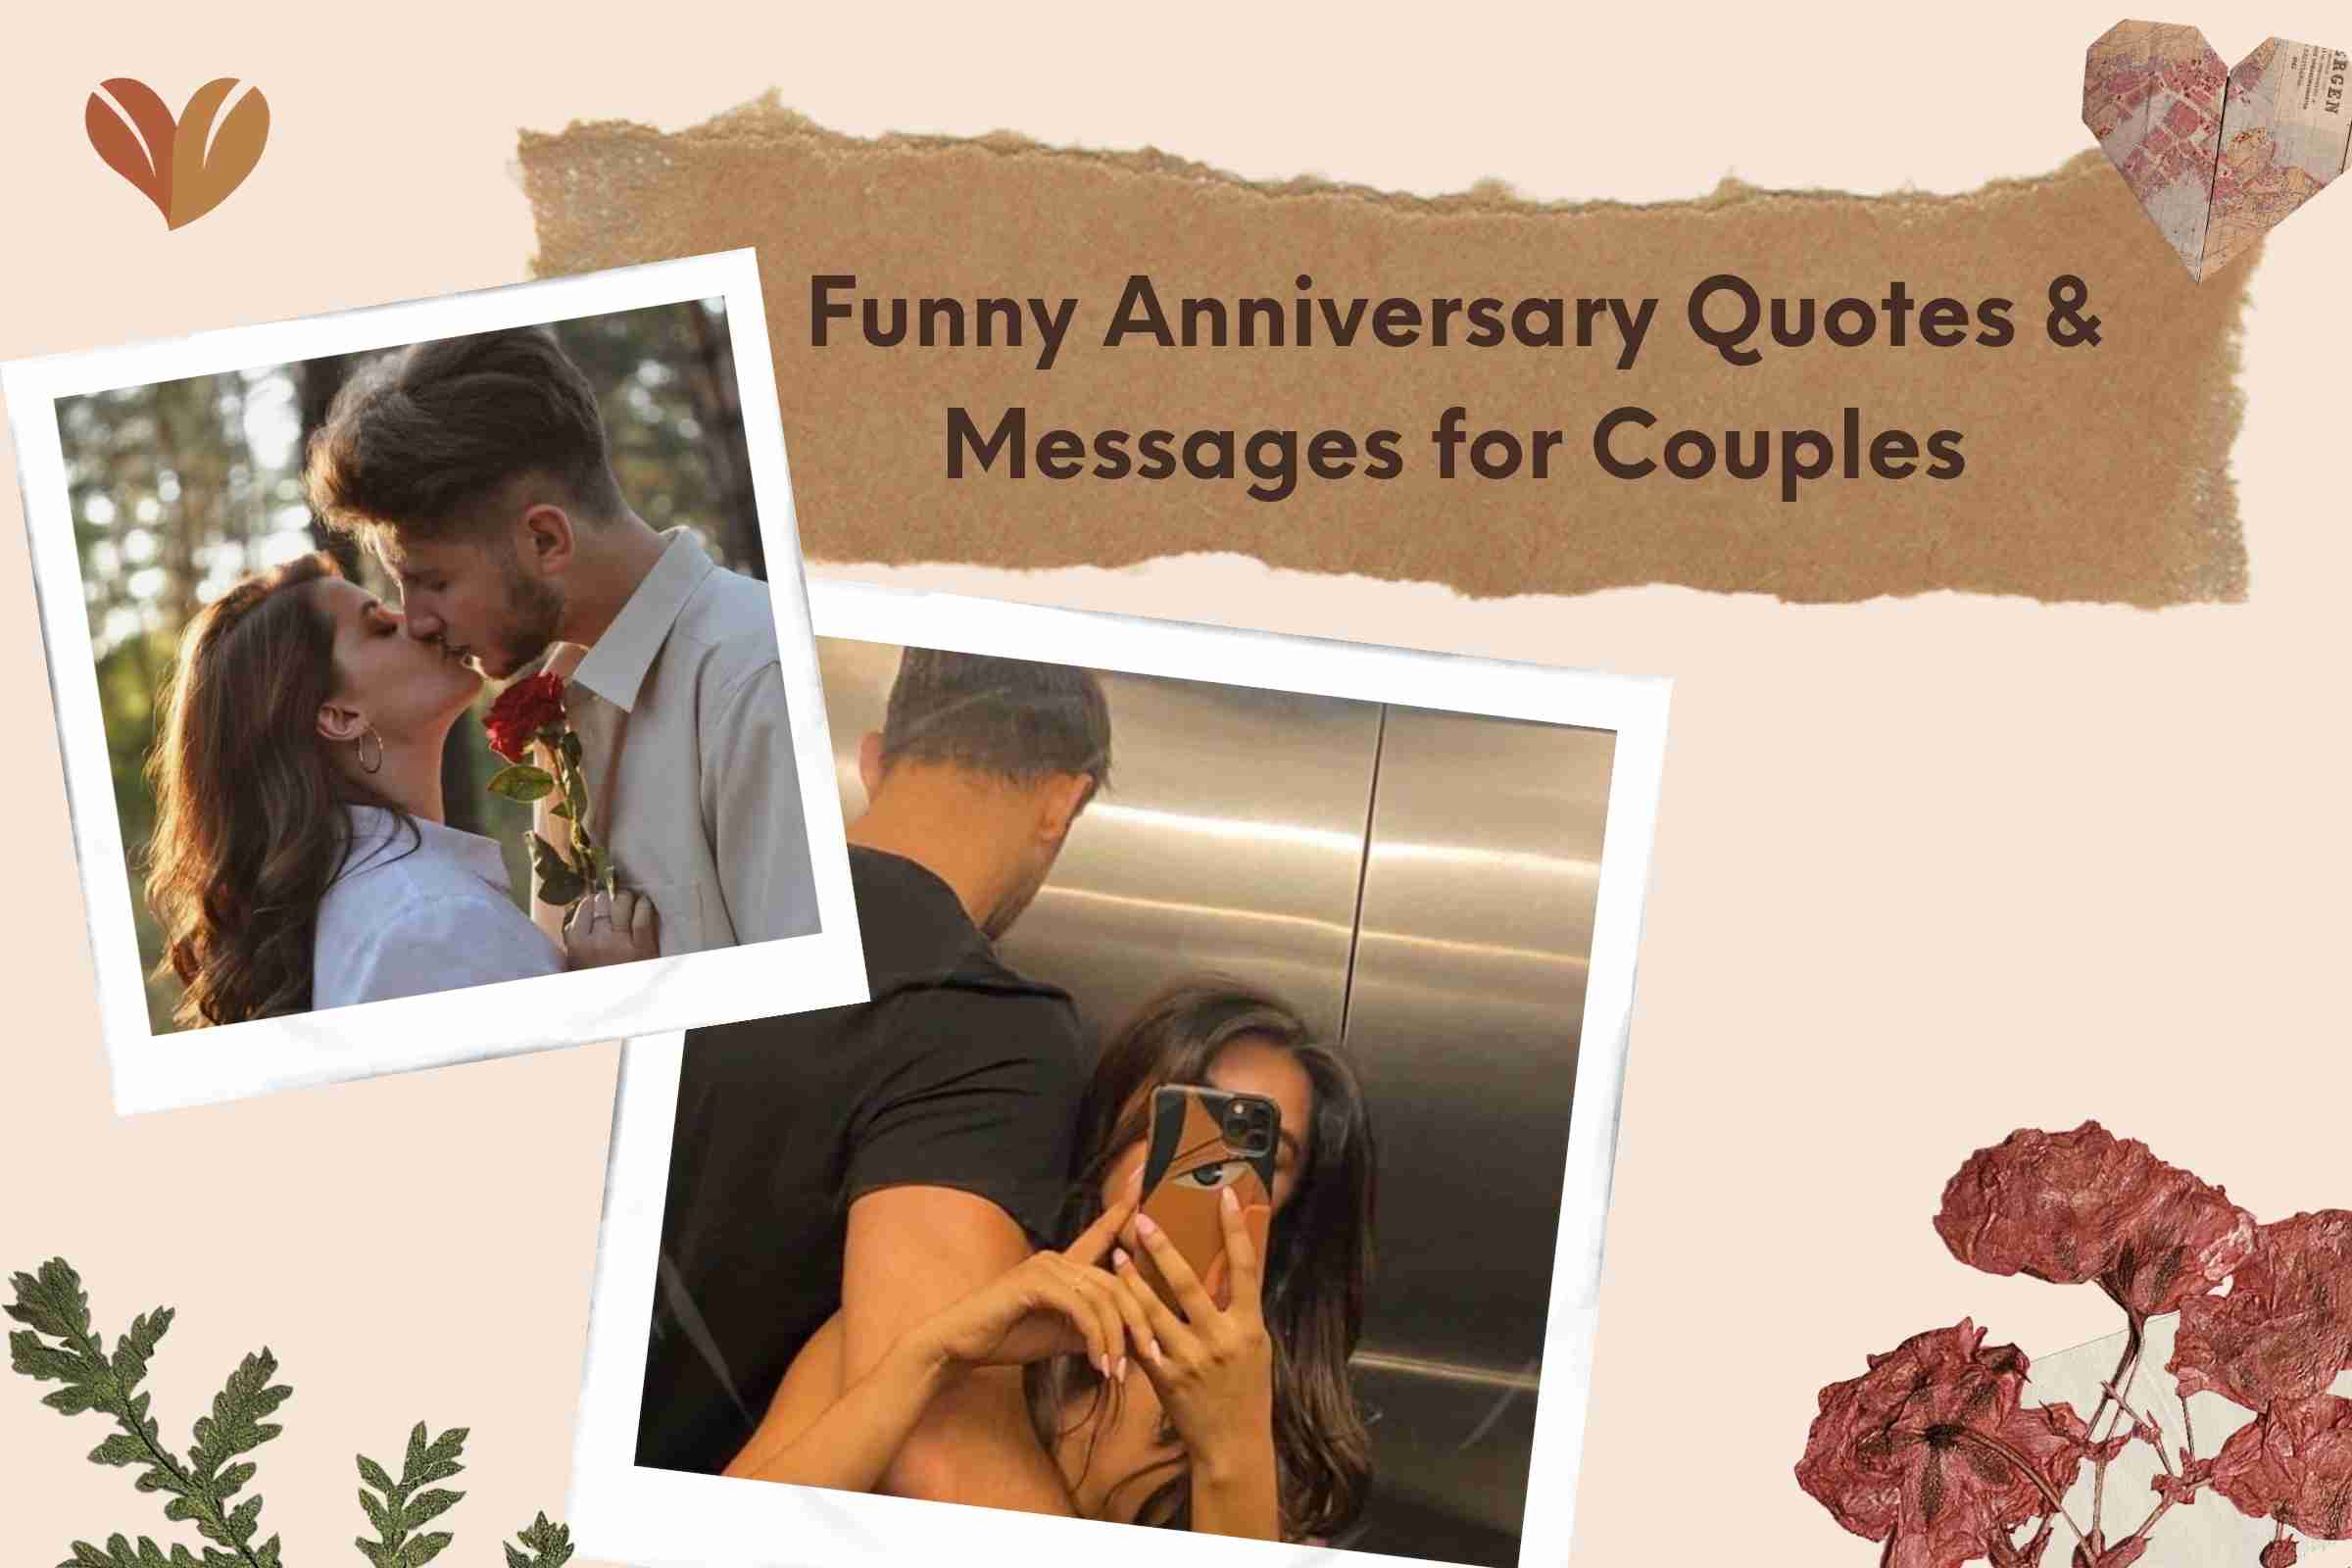 Funny Anniversary Quotes & Messages for Couples